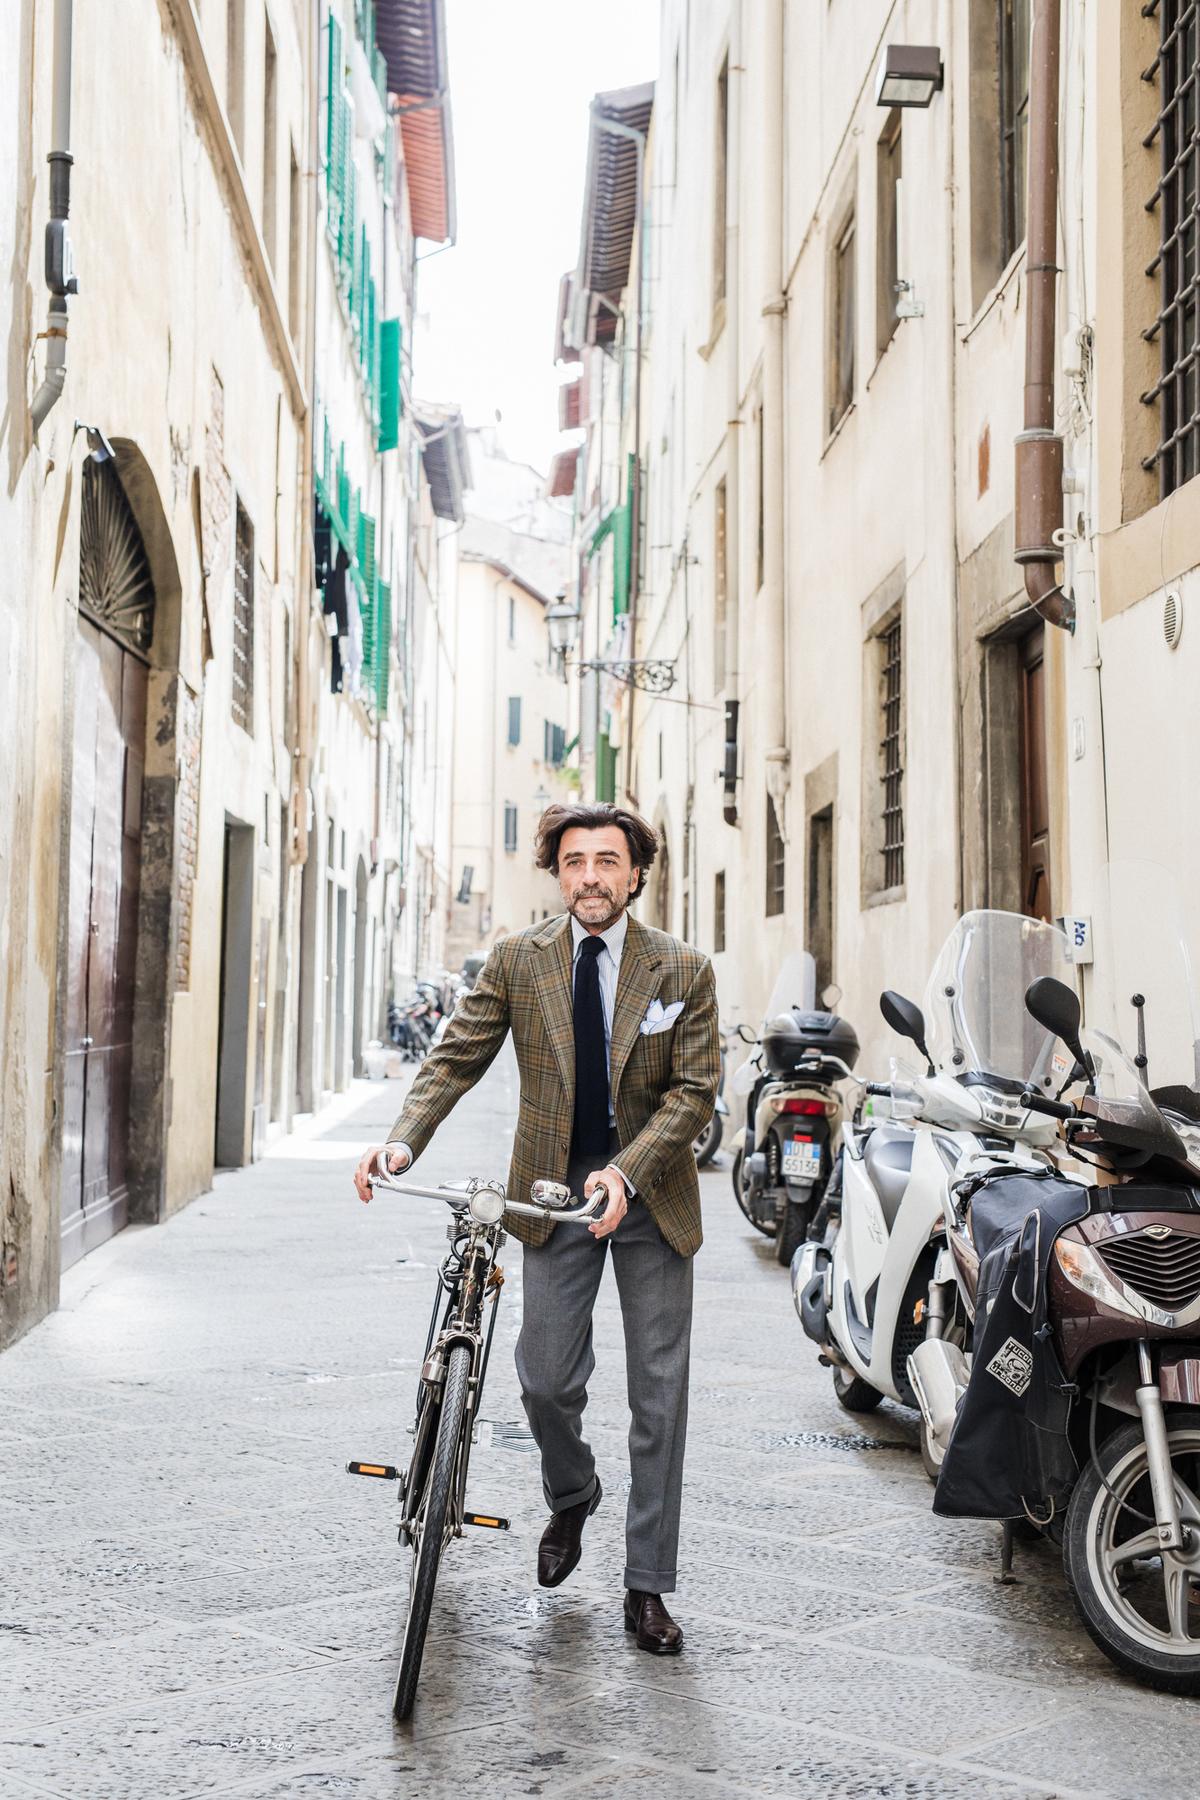 Tommaso Capozzoli, partner and brand ambassador at Sartoria Vestrucci, wearing a ready-to-wear tweed sport coat ($2,700), made-to-measure cotton shirt ($270), wool knit tie ($112), and ready-to-wear flannel trousers ($570). (Courtesy of Sartoria Vestrucci)